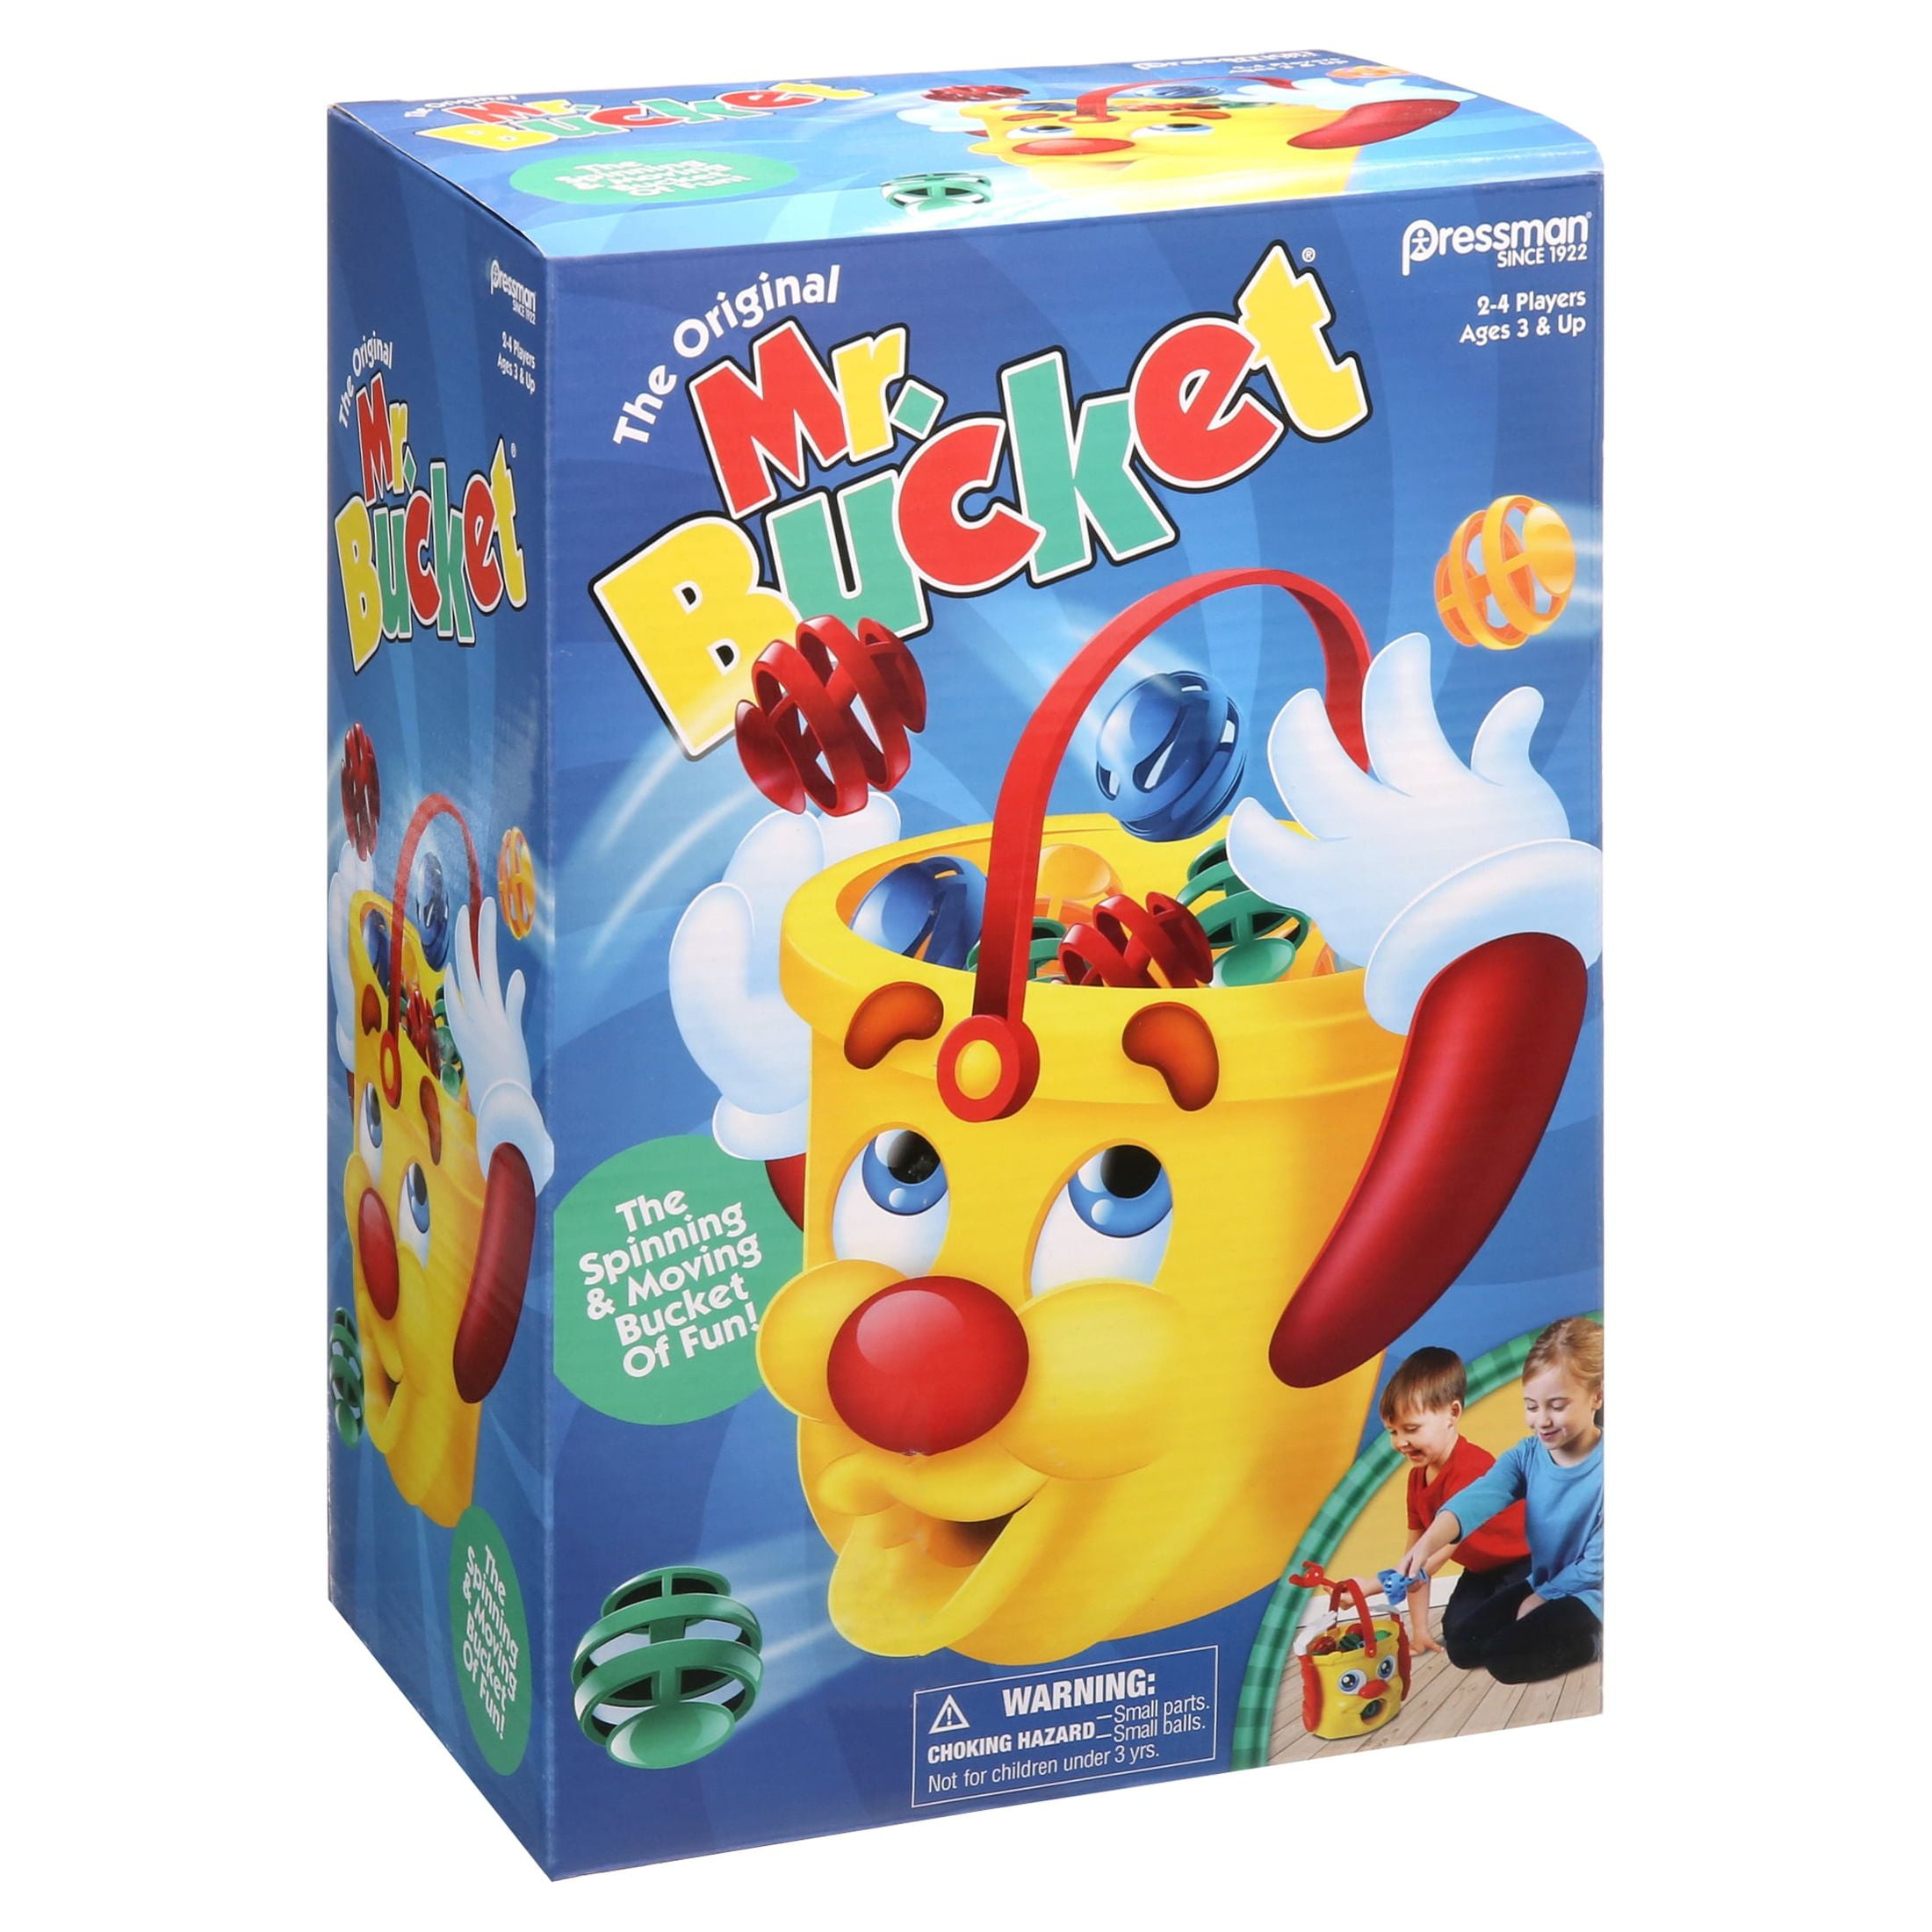 Point Games Giant Pick Up Sticks Game: 42 Brightly Colored Plastic Pick up  Sticks in Lucite Storage Can, For all Ages!